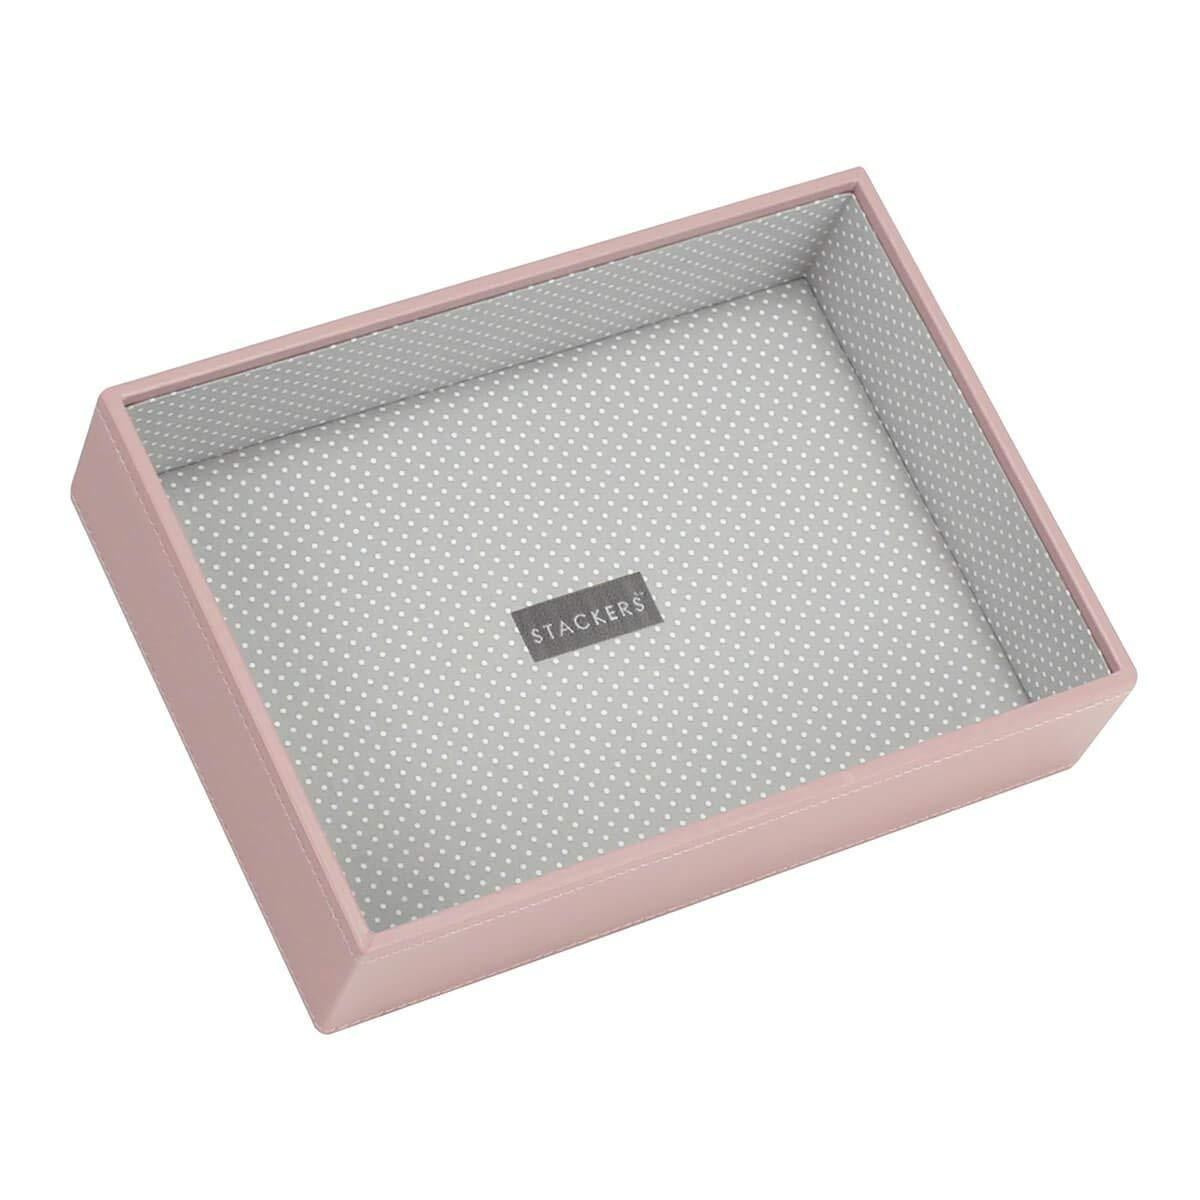 Soft Pink Classic Size Stackers Jewellery Box Deep Open Tray